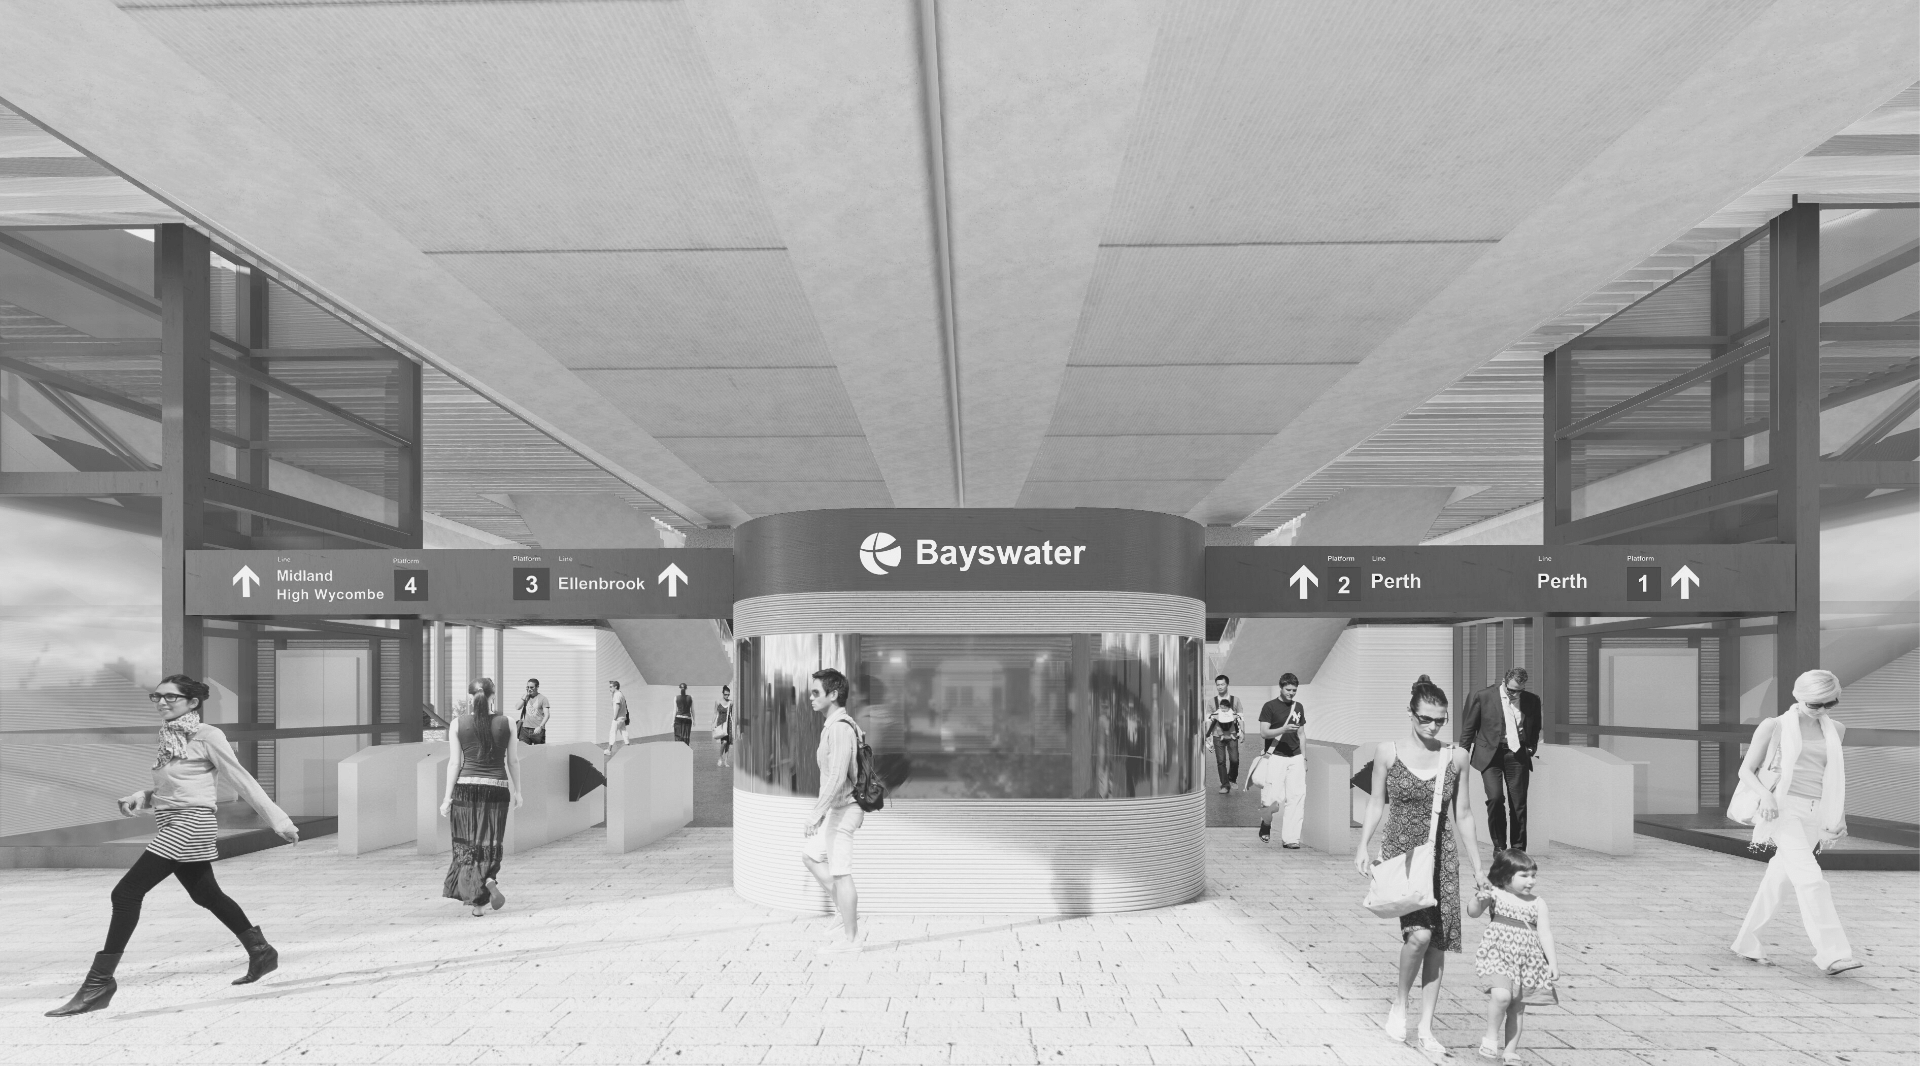 Bayswater station design changed after community feedback